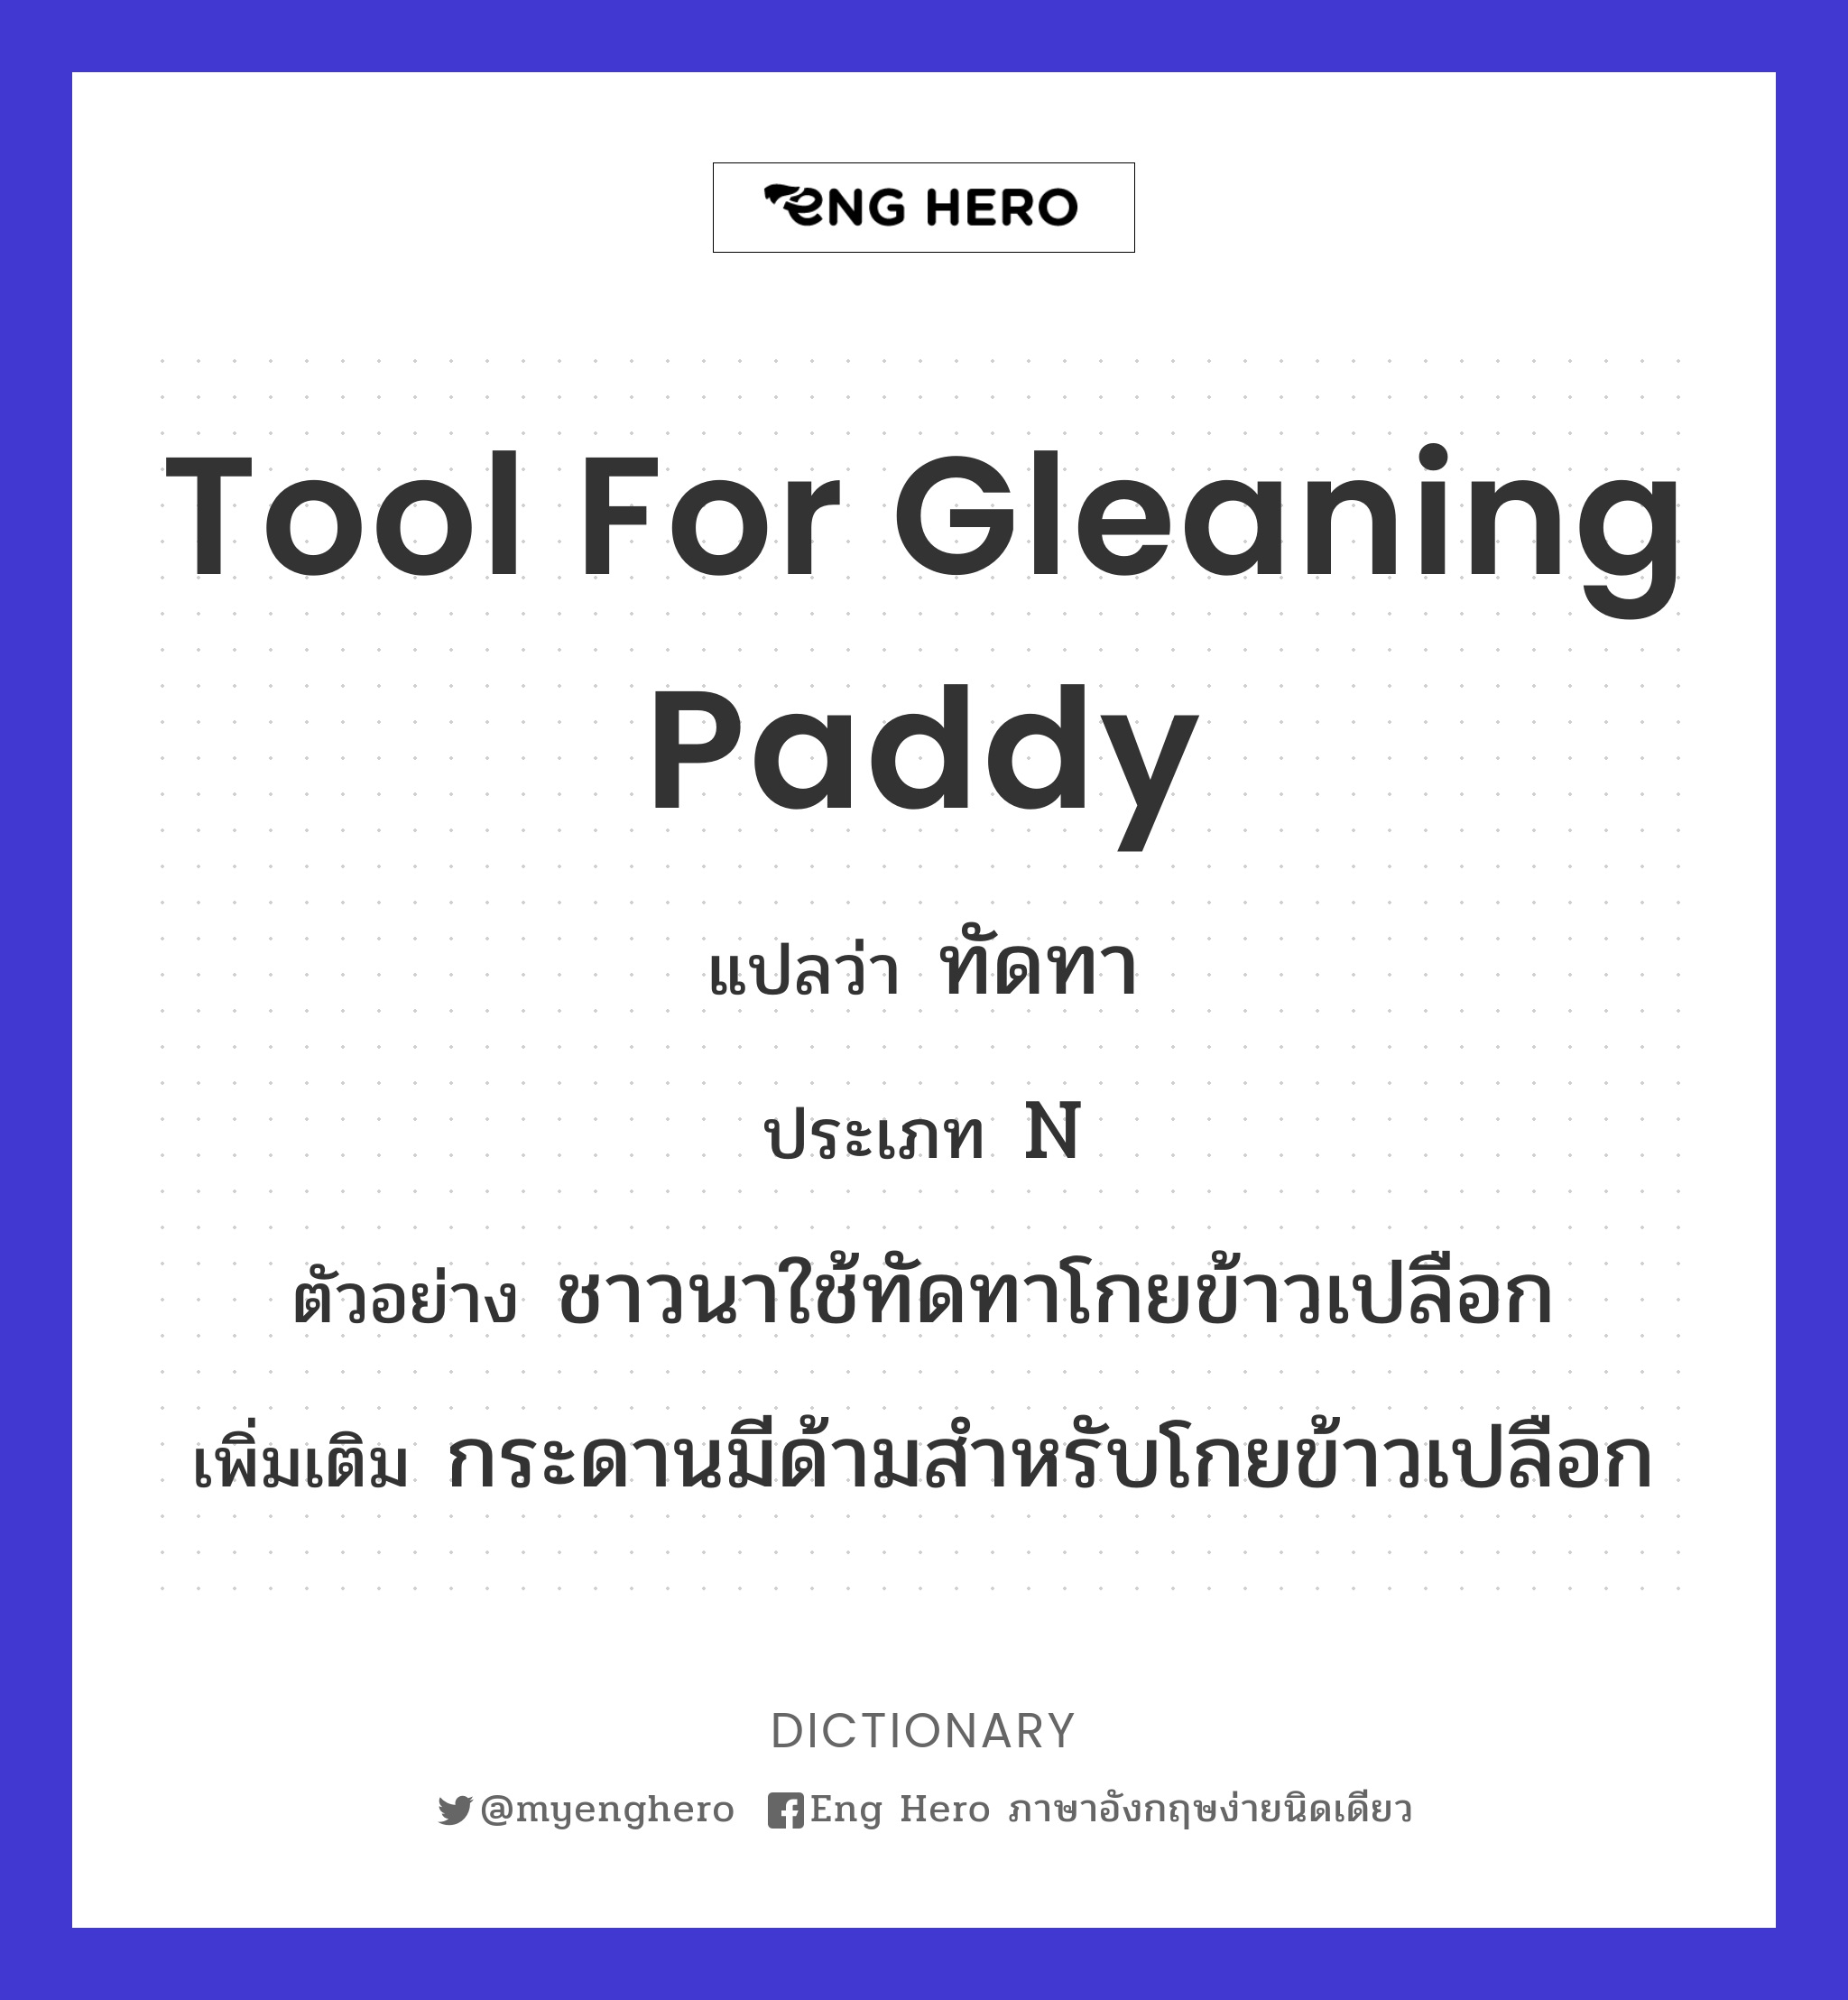 tool for gleaning paddy